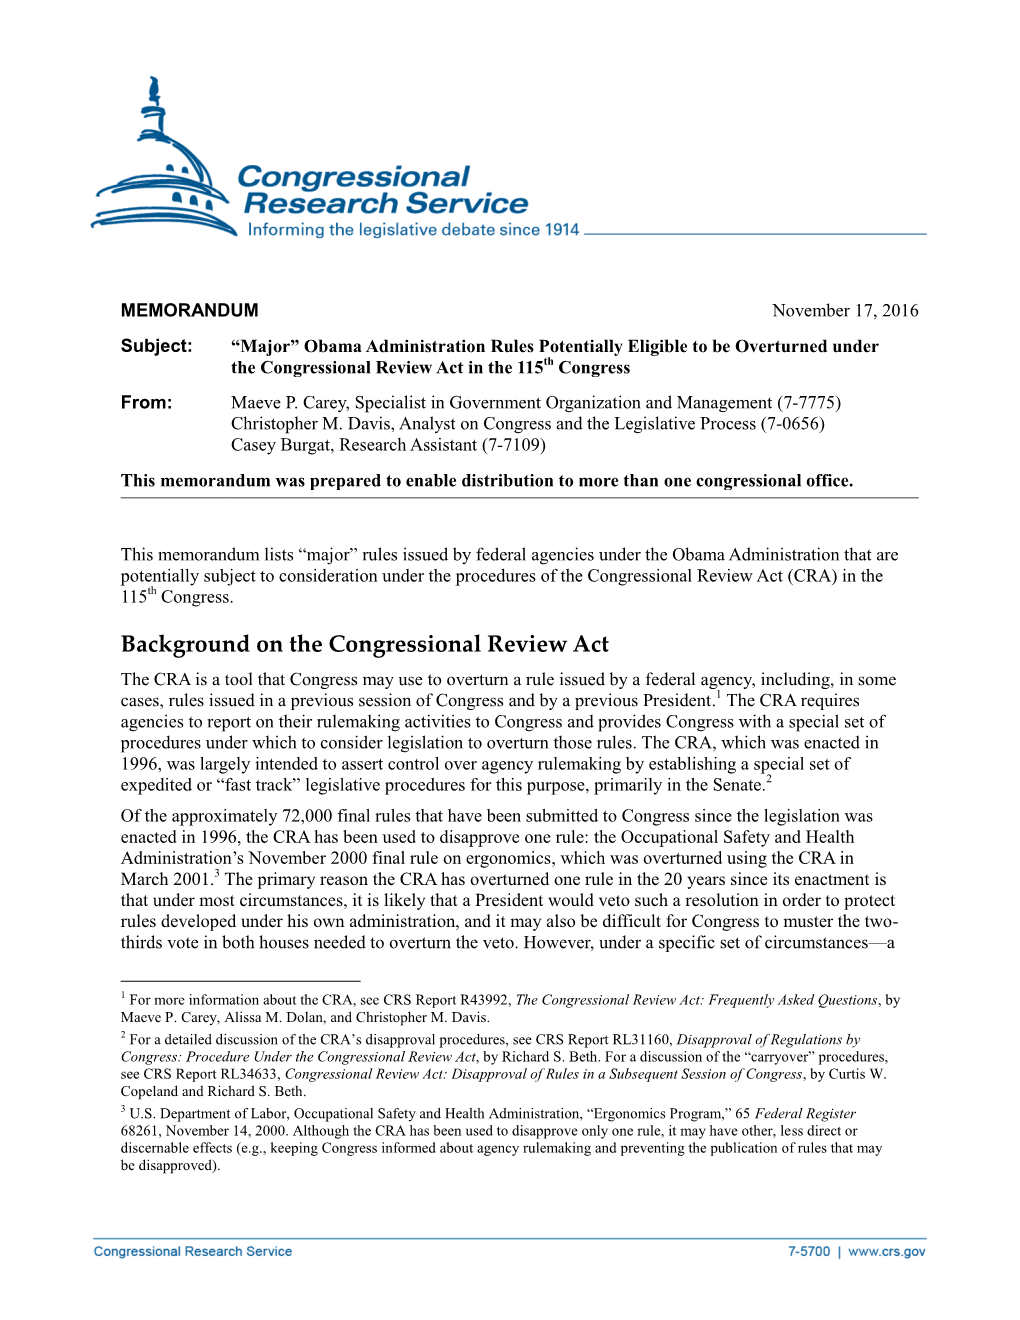 Background on the Congressional Review